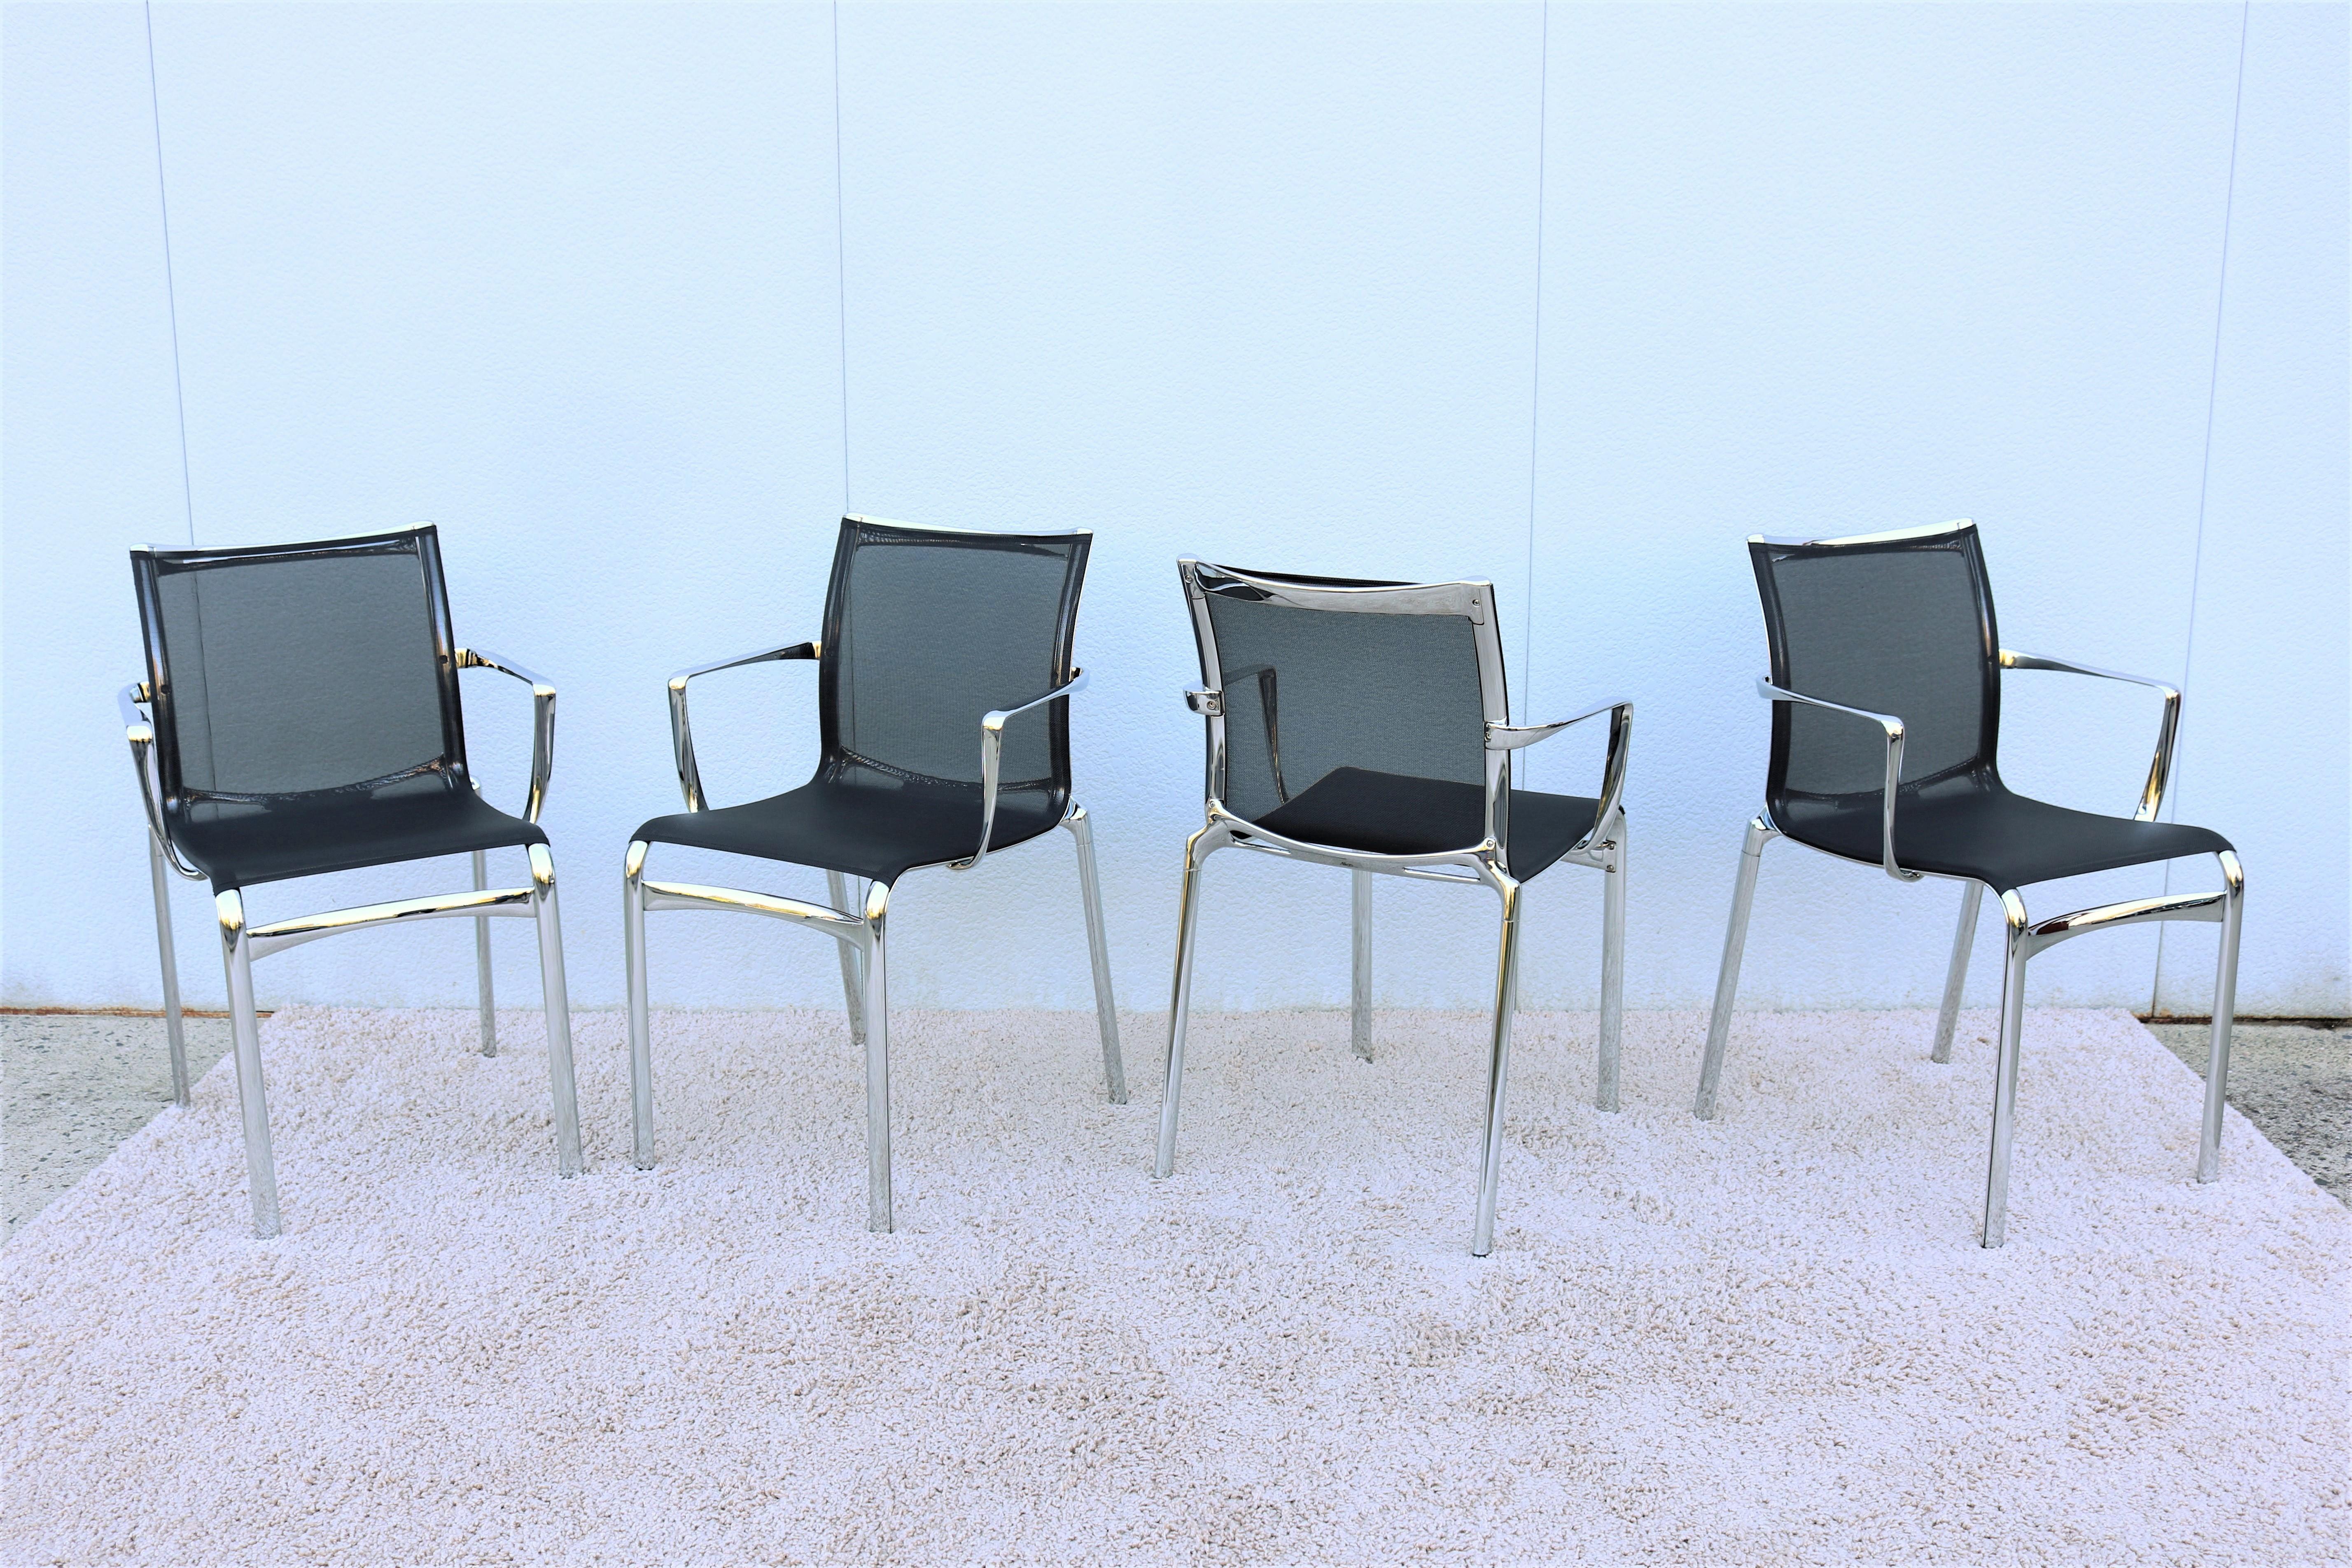 This clean and elegance Bigframe chairs are stylish and functional, sturdy and very comfortable.
The lightweight design and stacking feature make it suitable for most diverse situations and needs. 
Great for home dining room or office conference